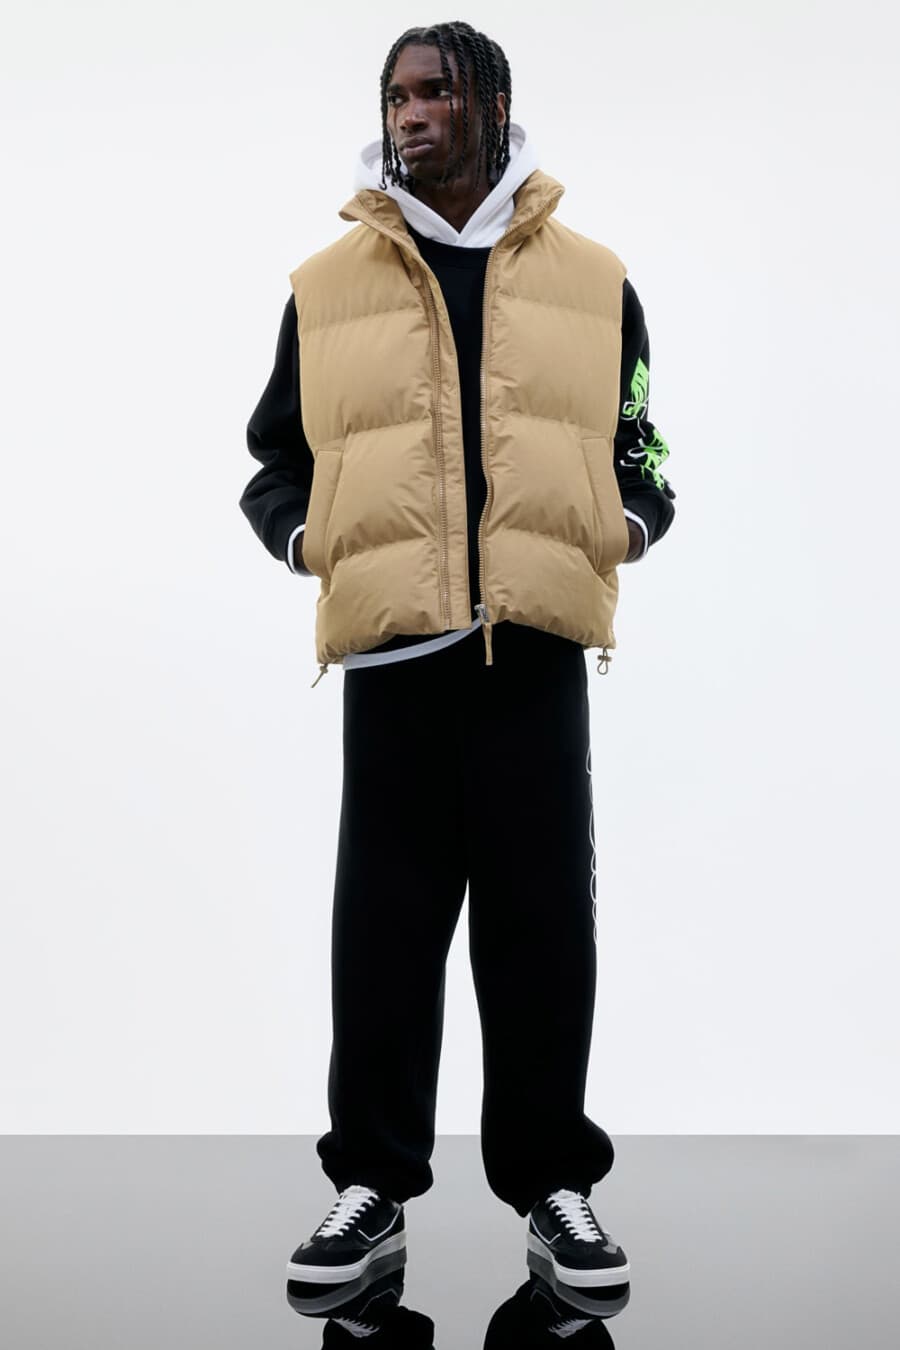 Men's baggy black pants, white hoodie, black long-sleeve top, oversized camel puffer vest and black sneakers outfit